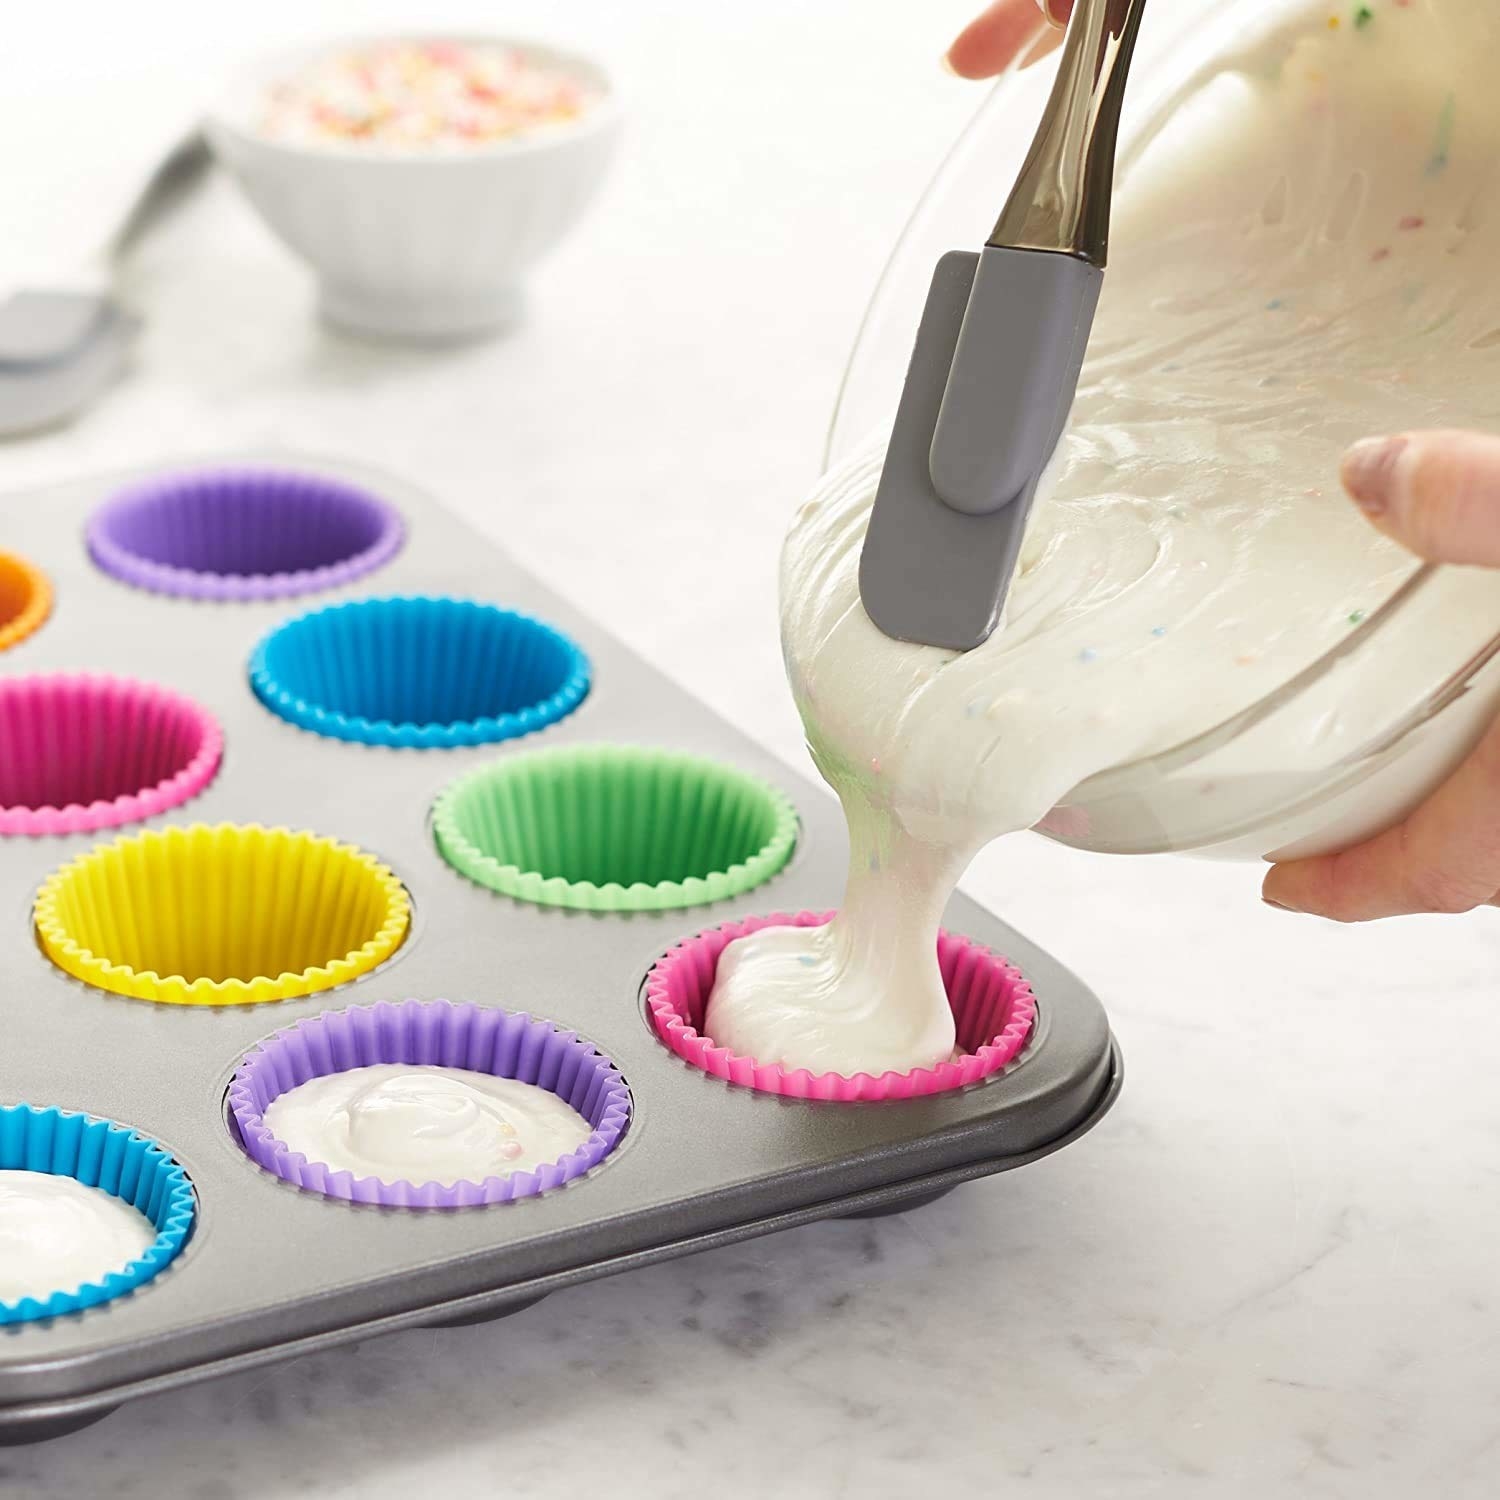 A person pouring cake batter into silicone moulds.